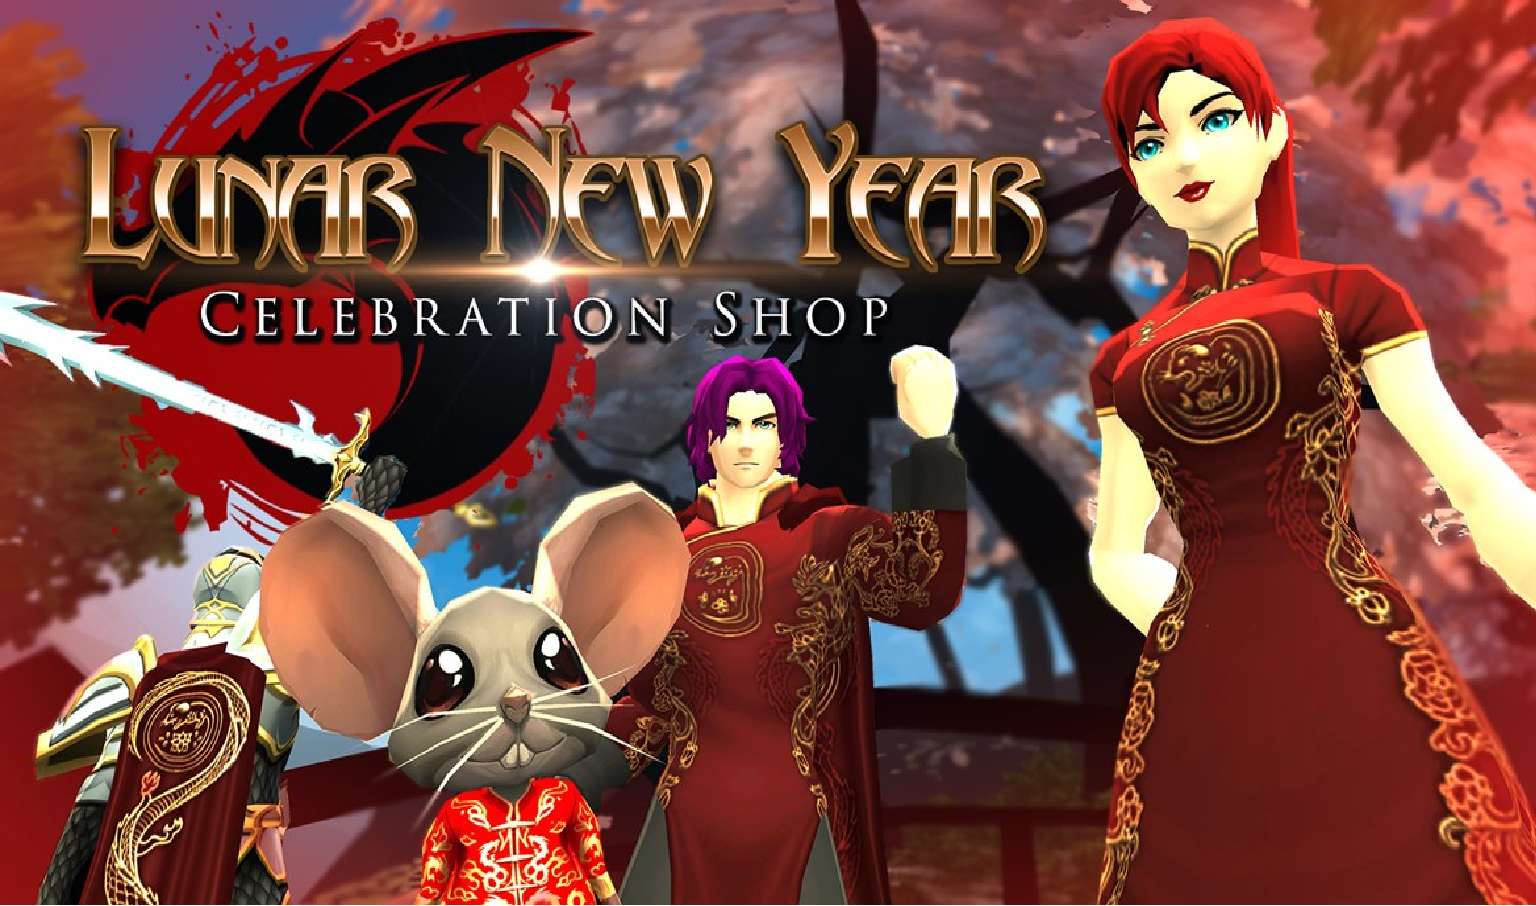 AdventureQuest 3D Celebrates The Lunar New Year With In-Game Items Based On The Year Of The Rat